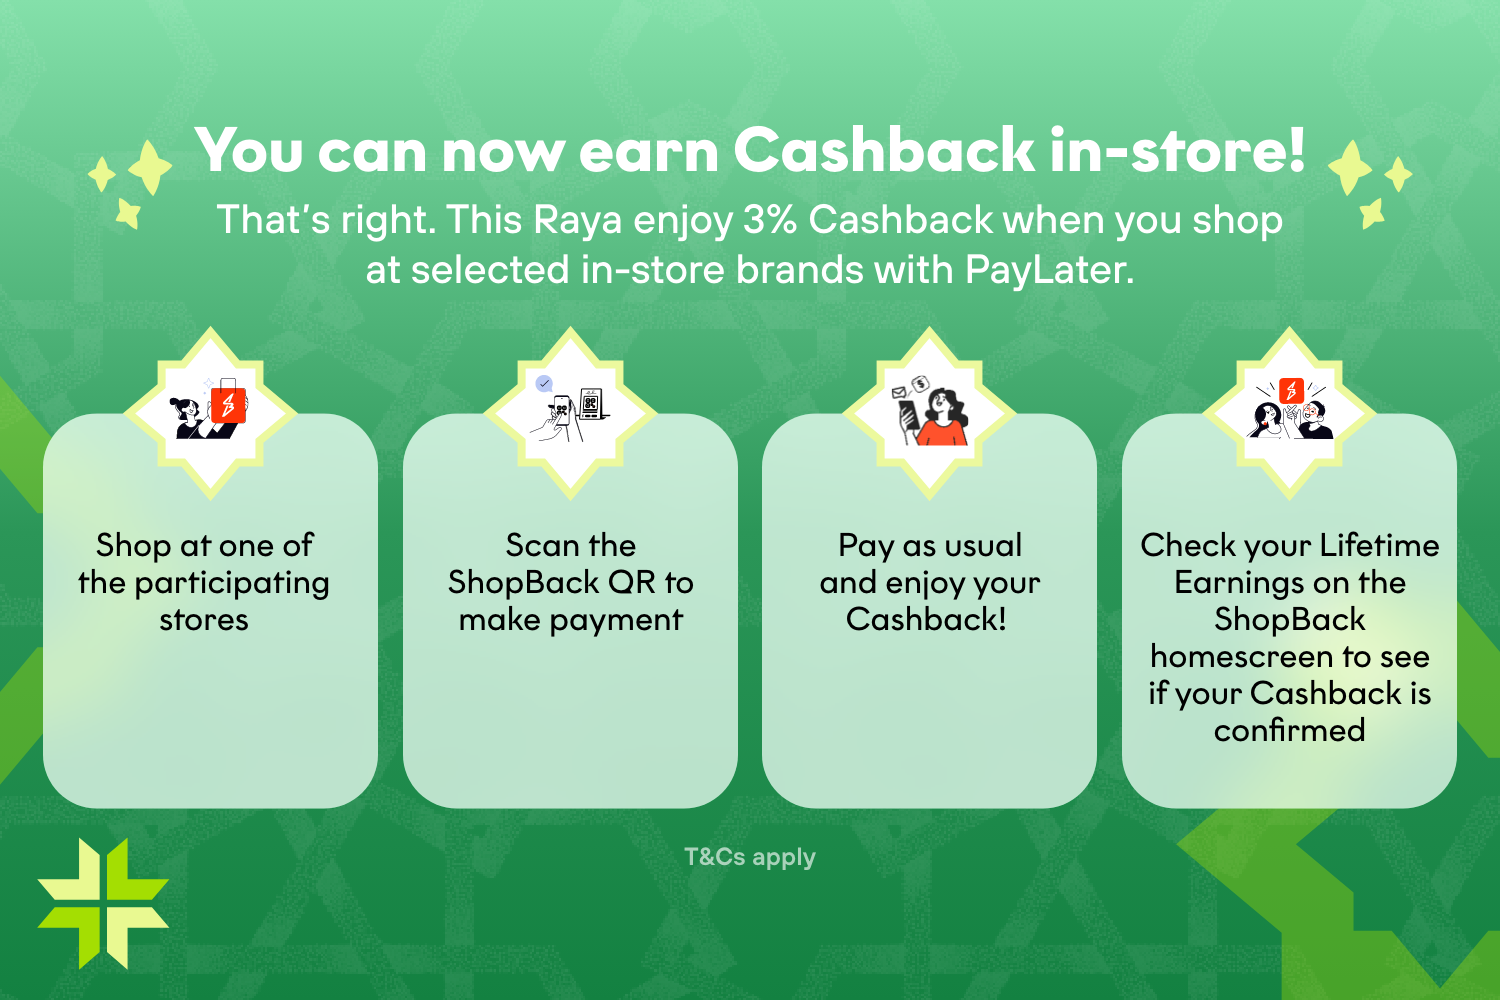 About boost cashback